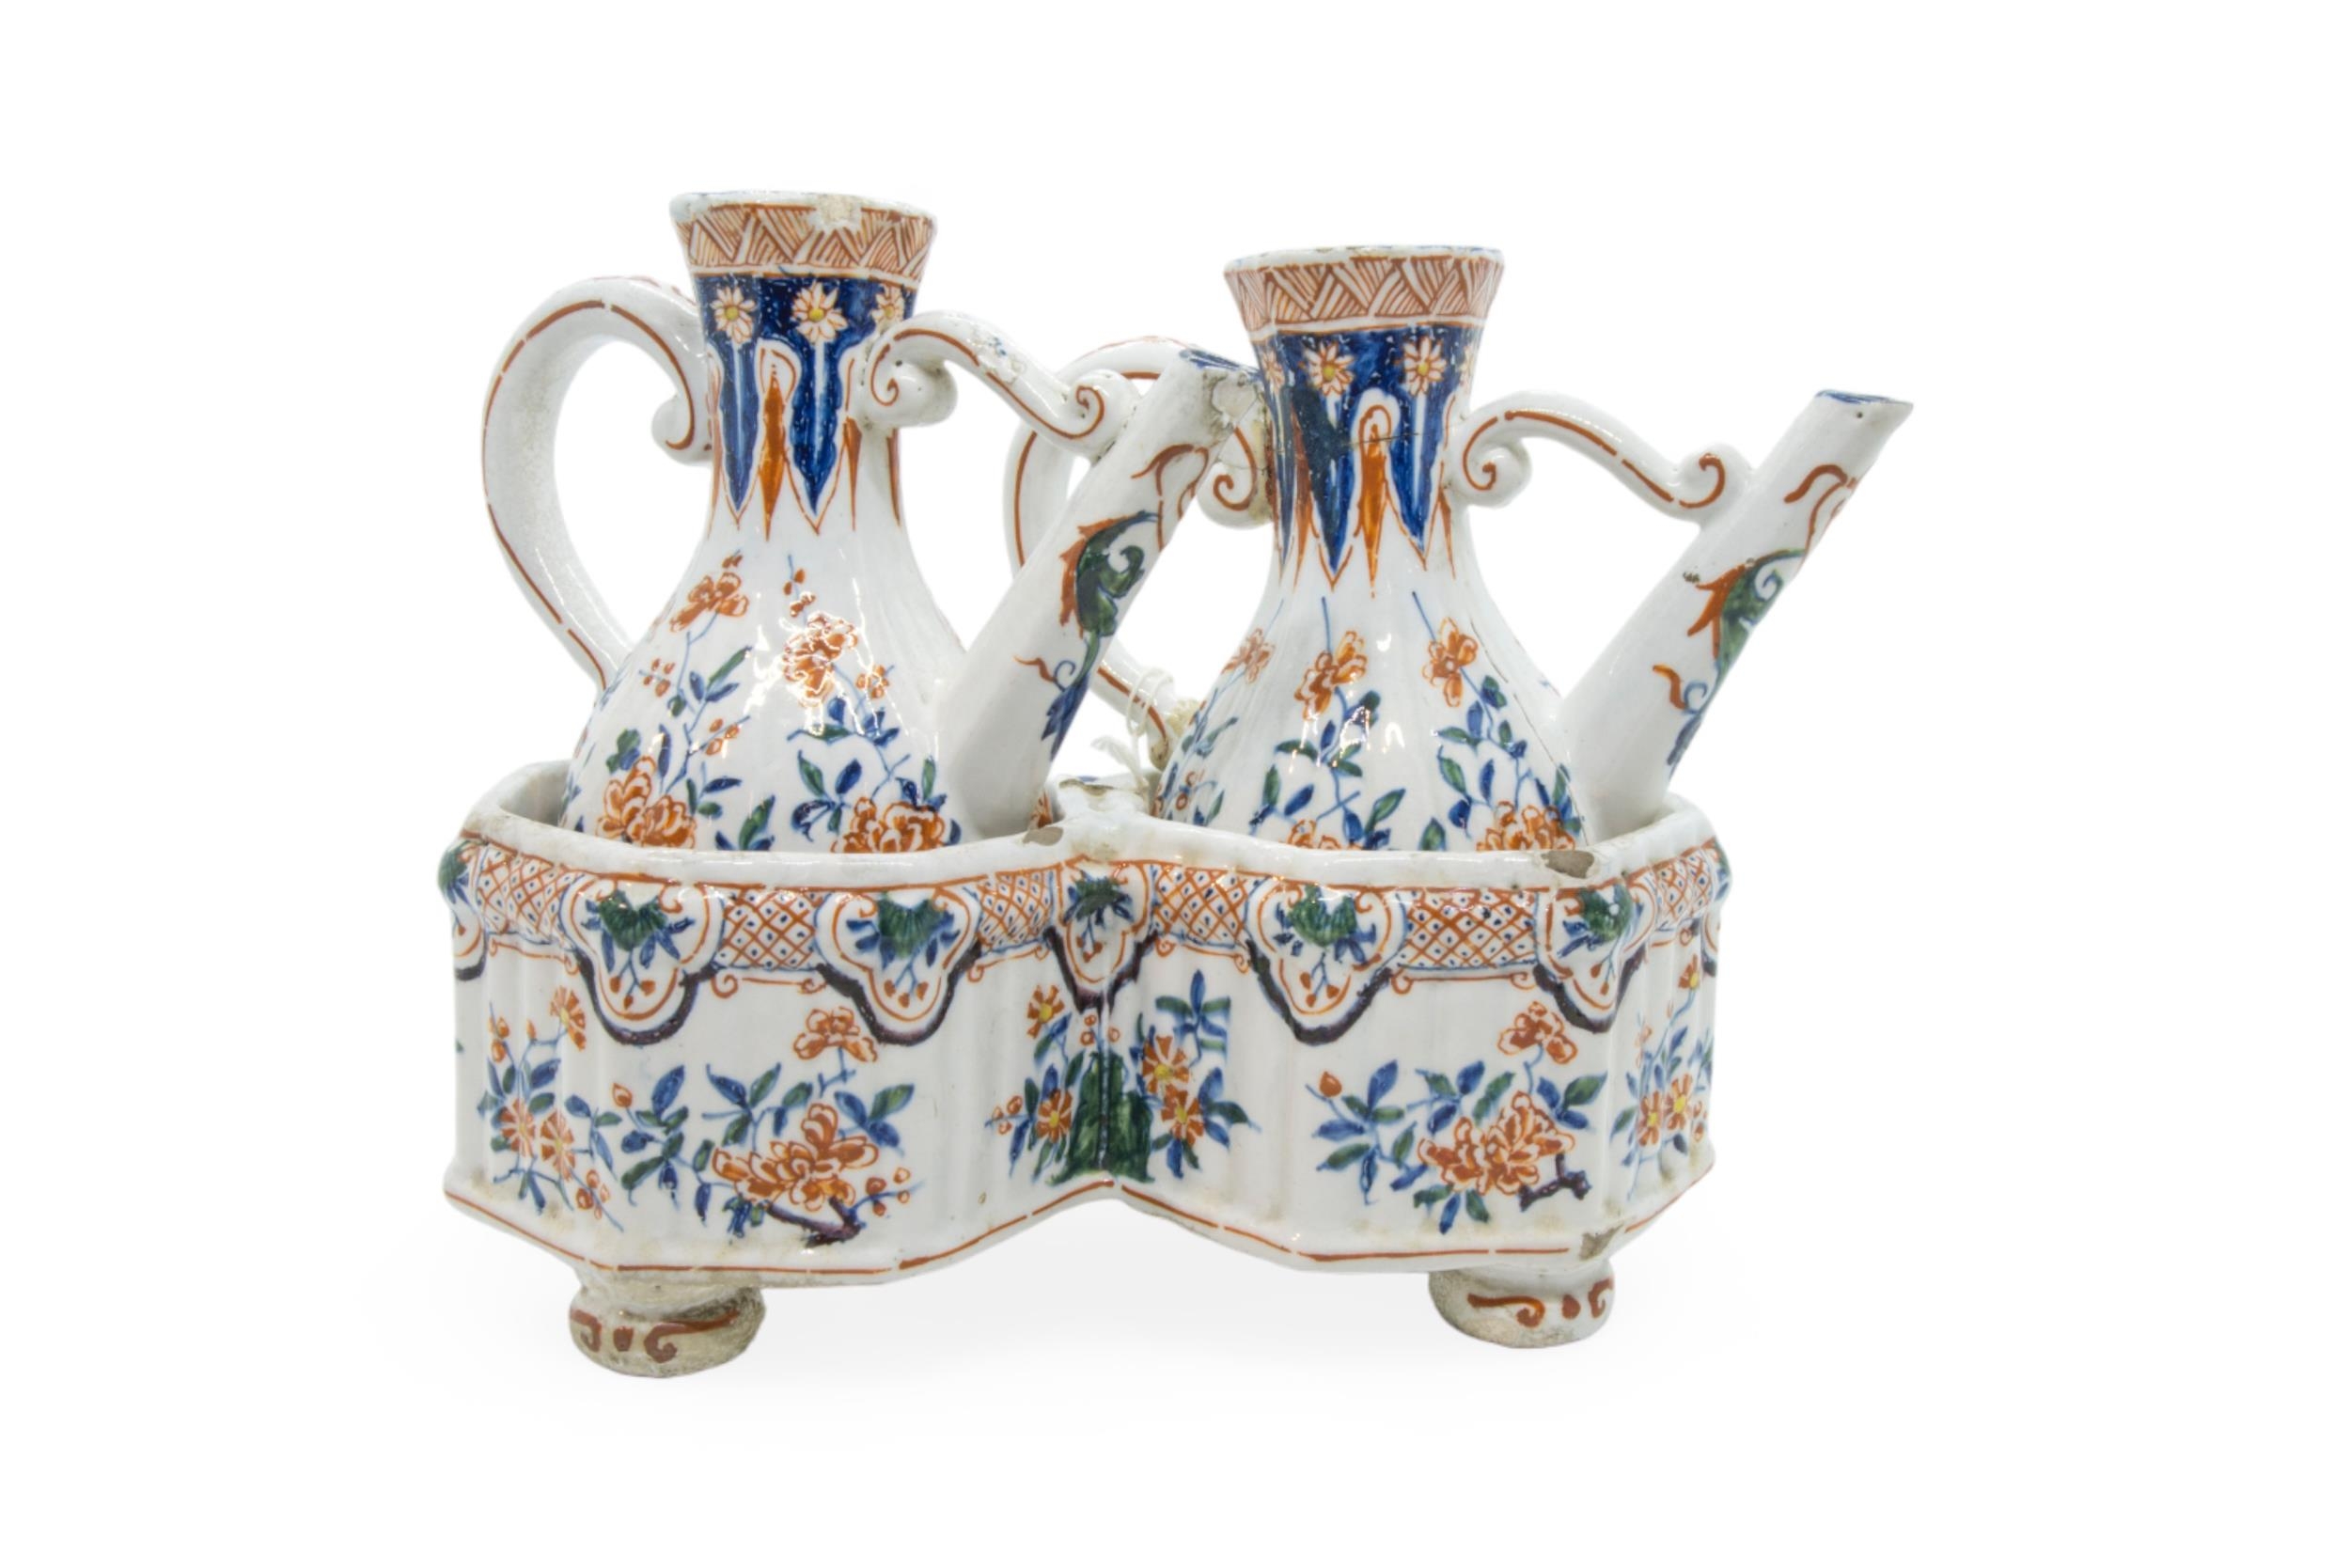 DE ROOS DELFT, A CONDIMENT SET ON STAND 18th / 19th century, 16.5cms high - Image 2 of 3